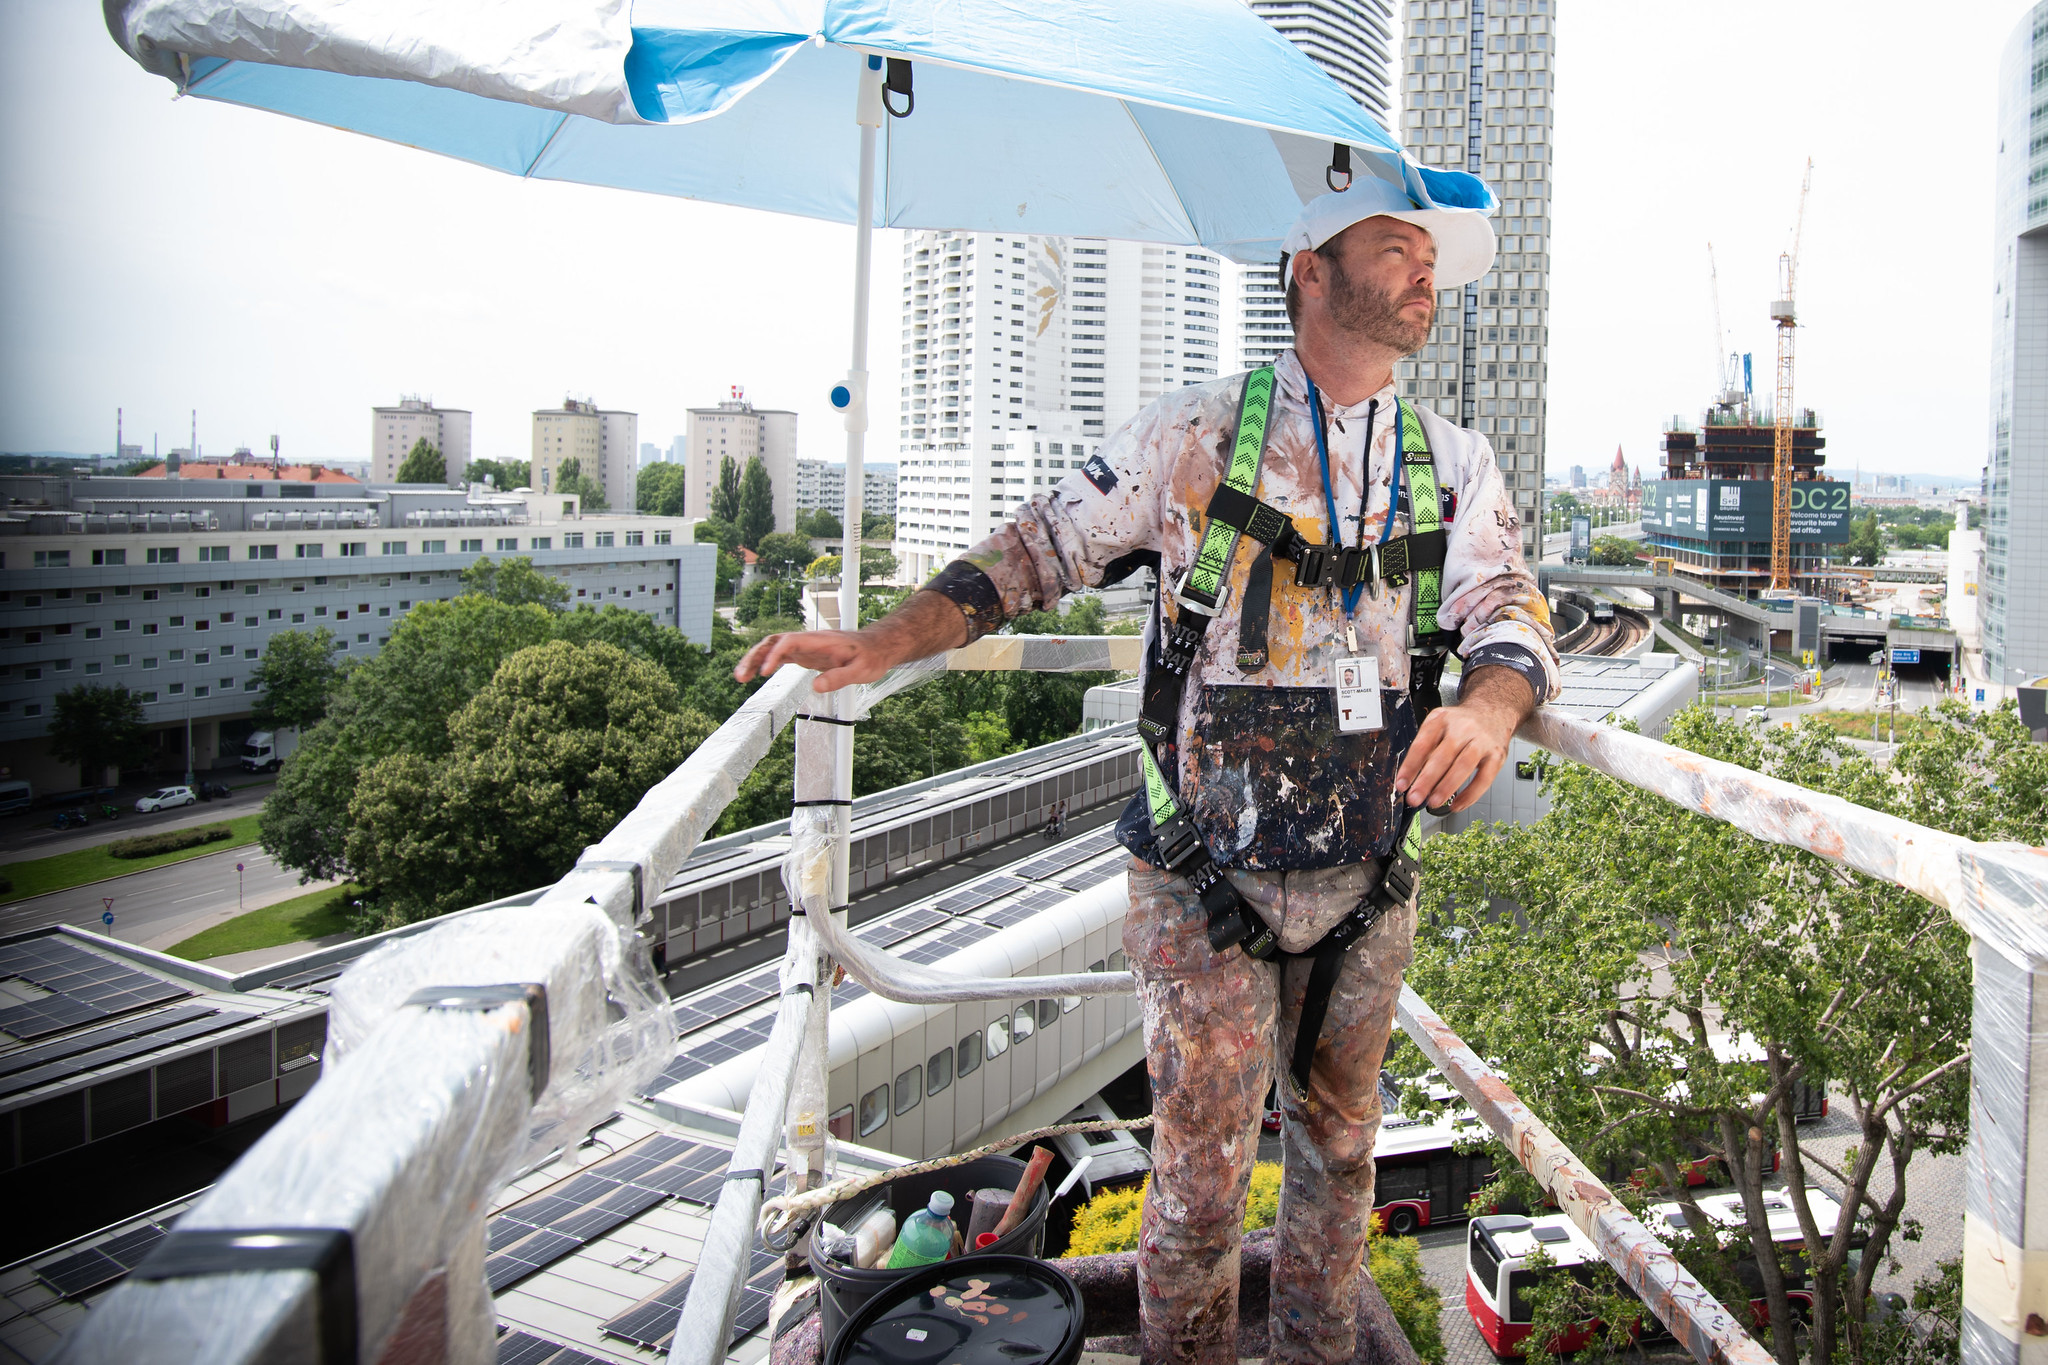 Man dressed in paint-covered clothes, wearing a cap and a safety harness, standing in a crane lift with blue sun umbrella in one corner, high up off the ground.